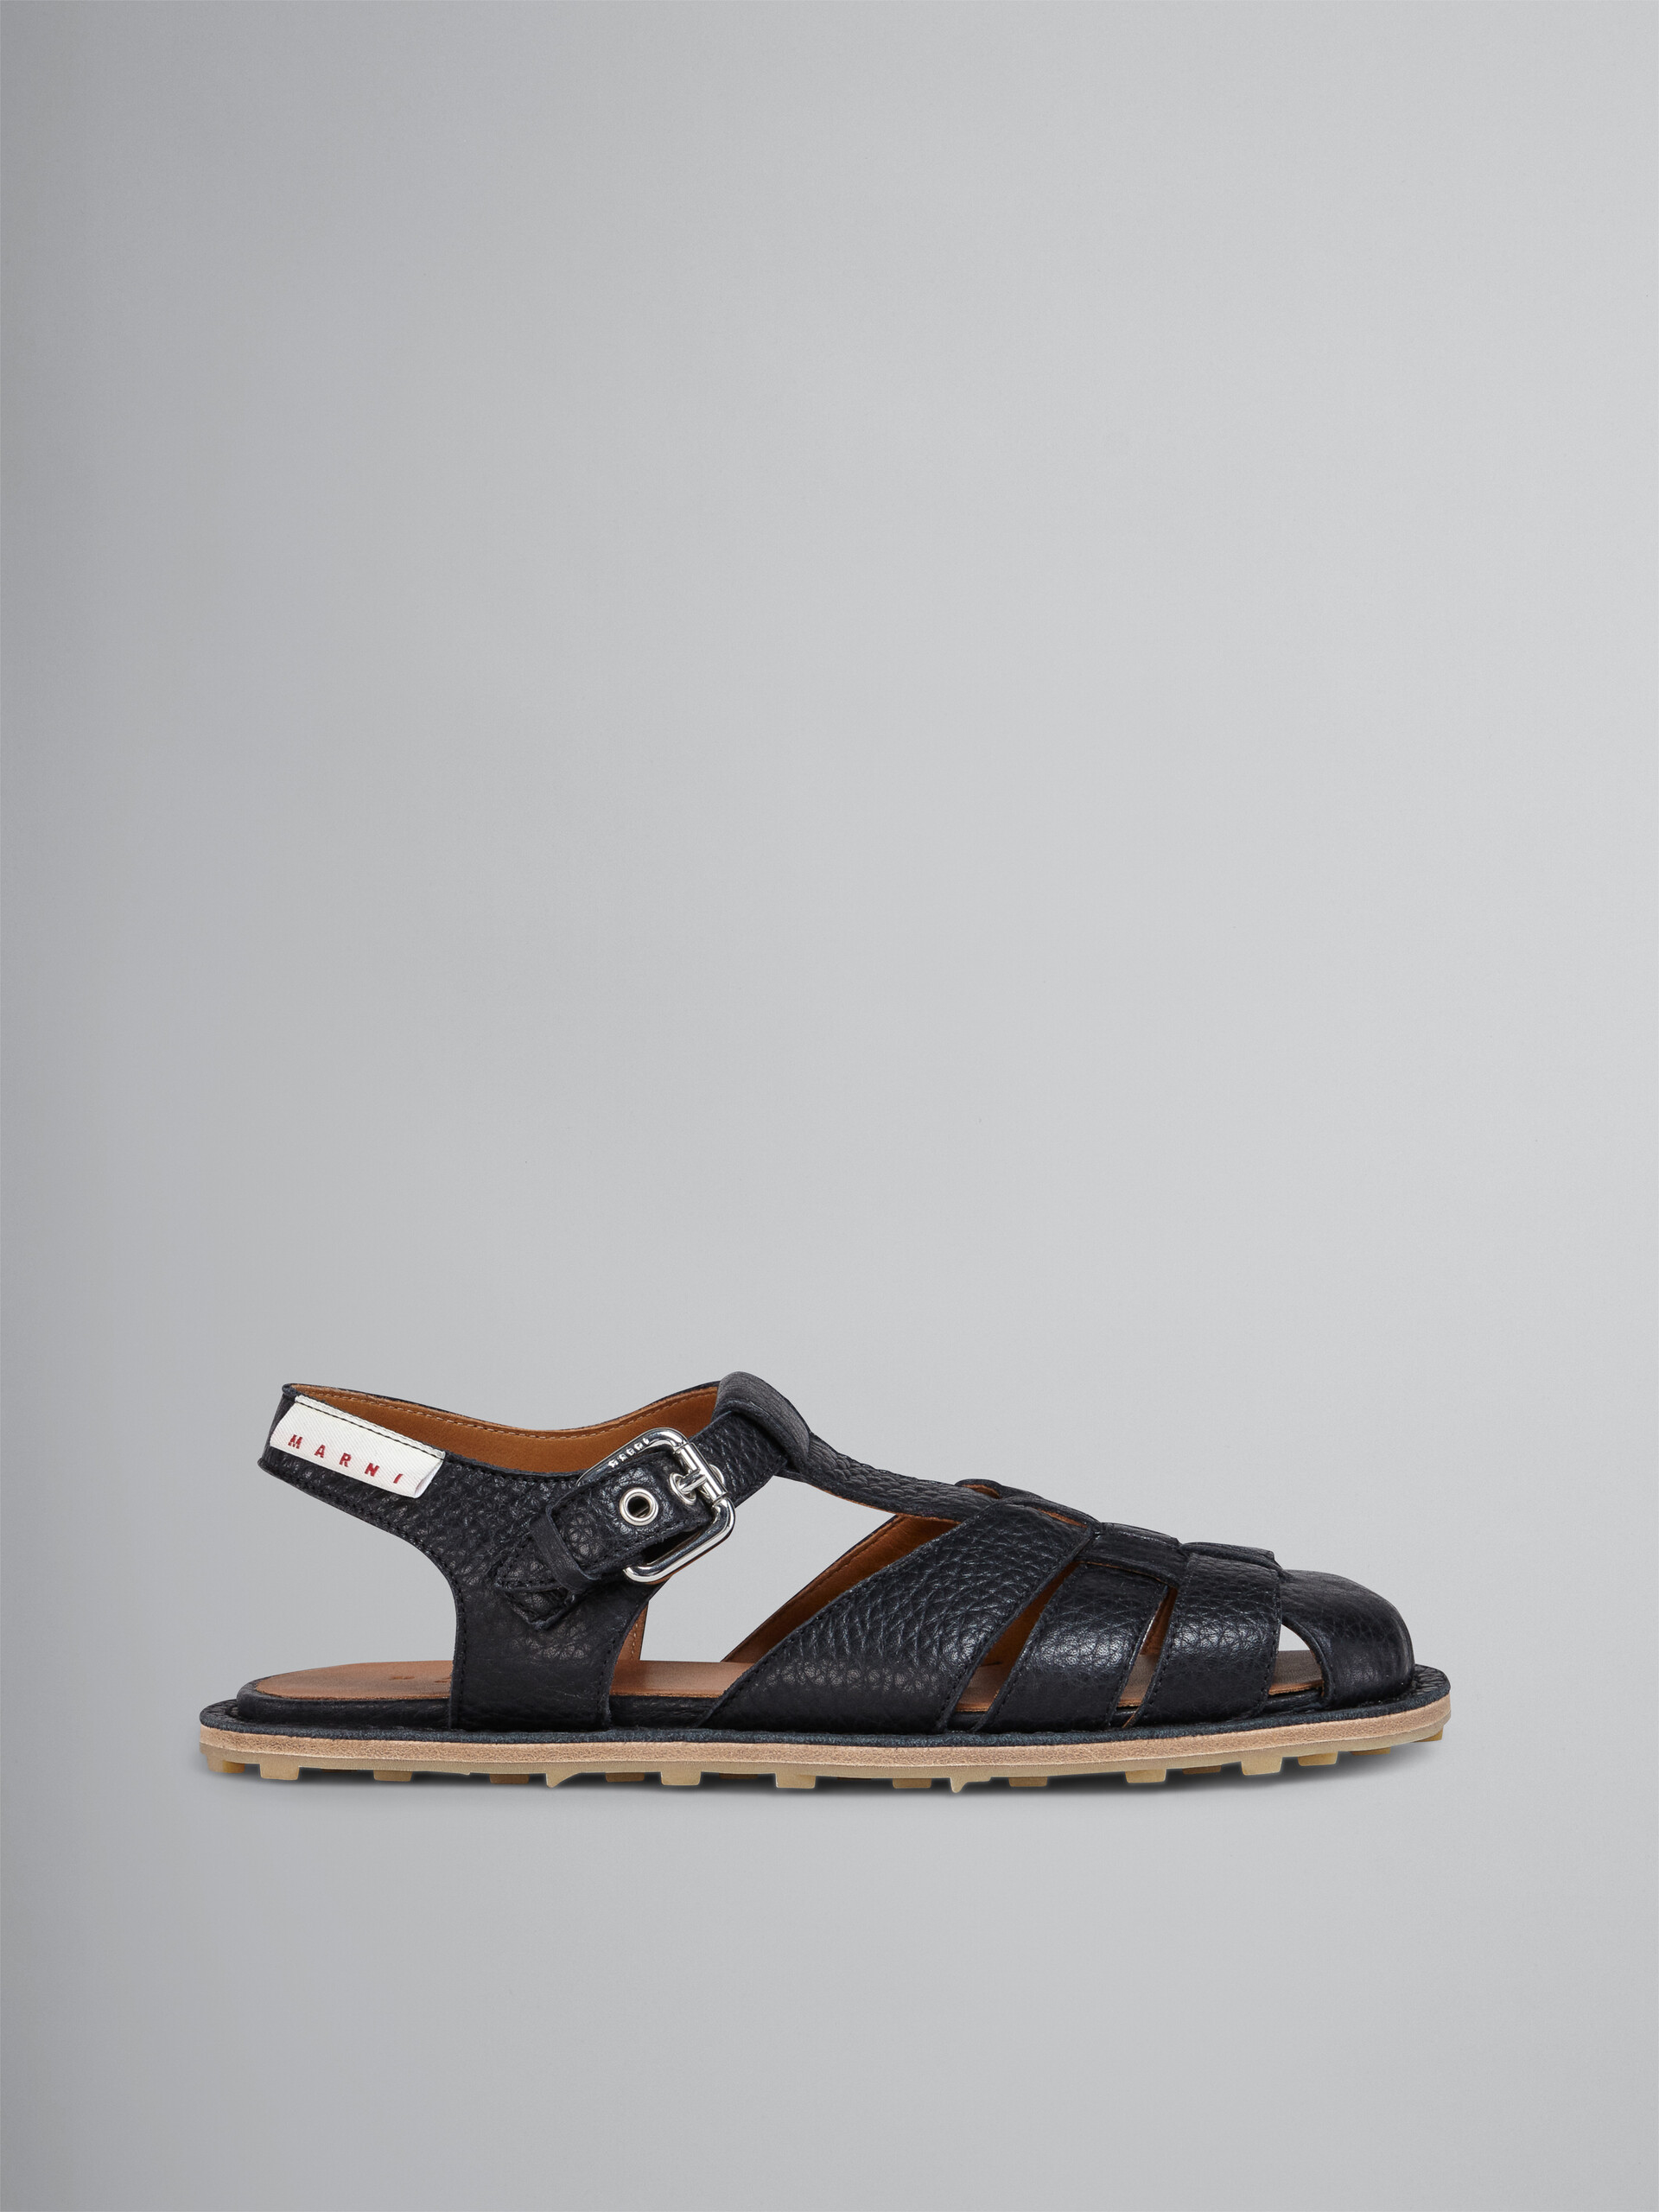 Grained calf leather Fisherman sandal - Sandals - Image 1